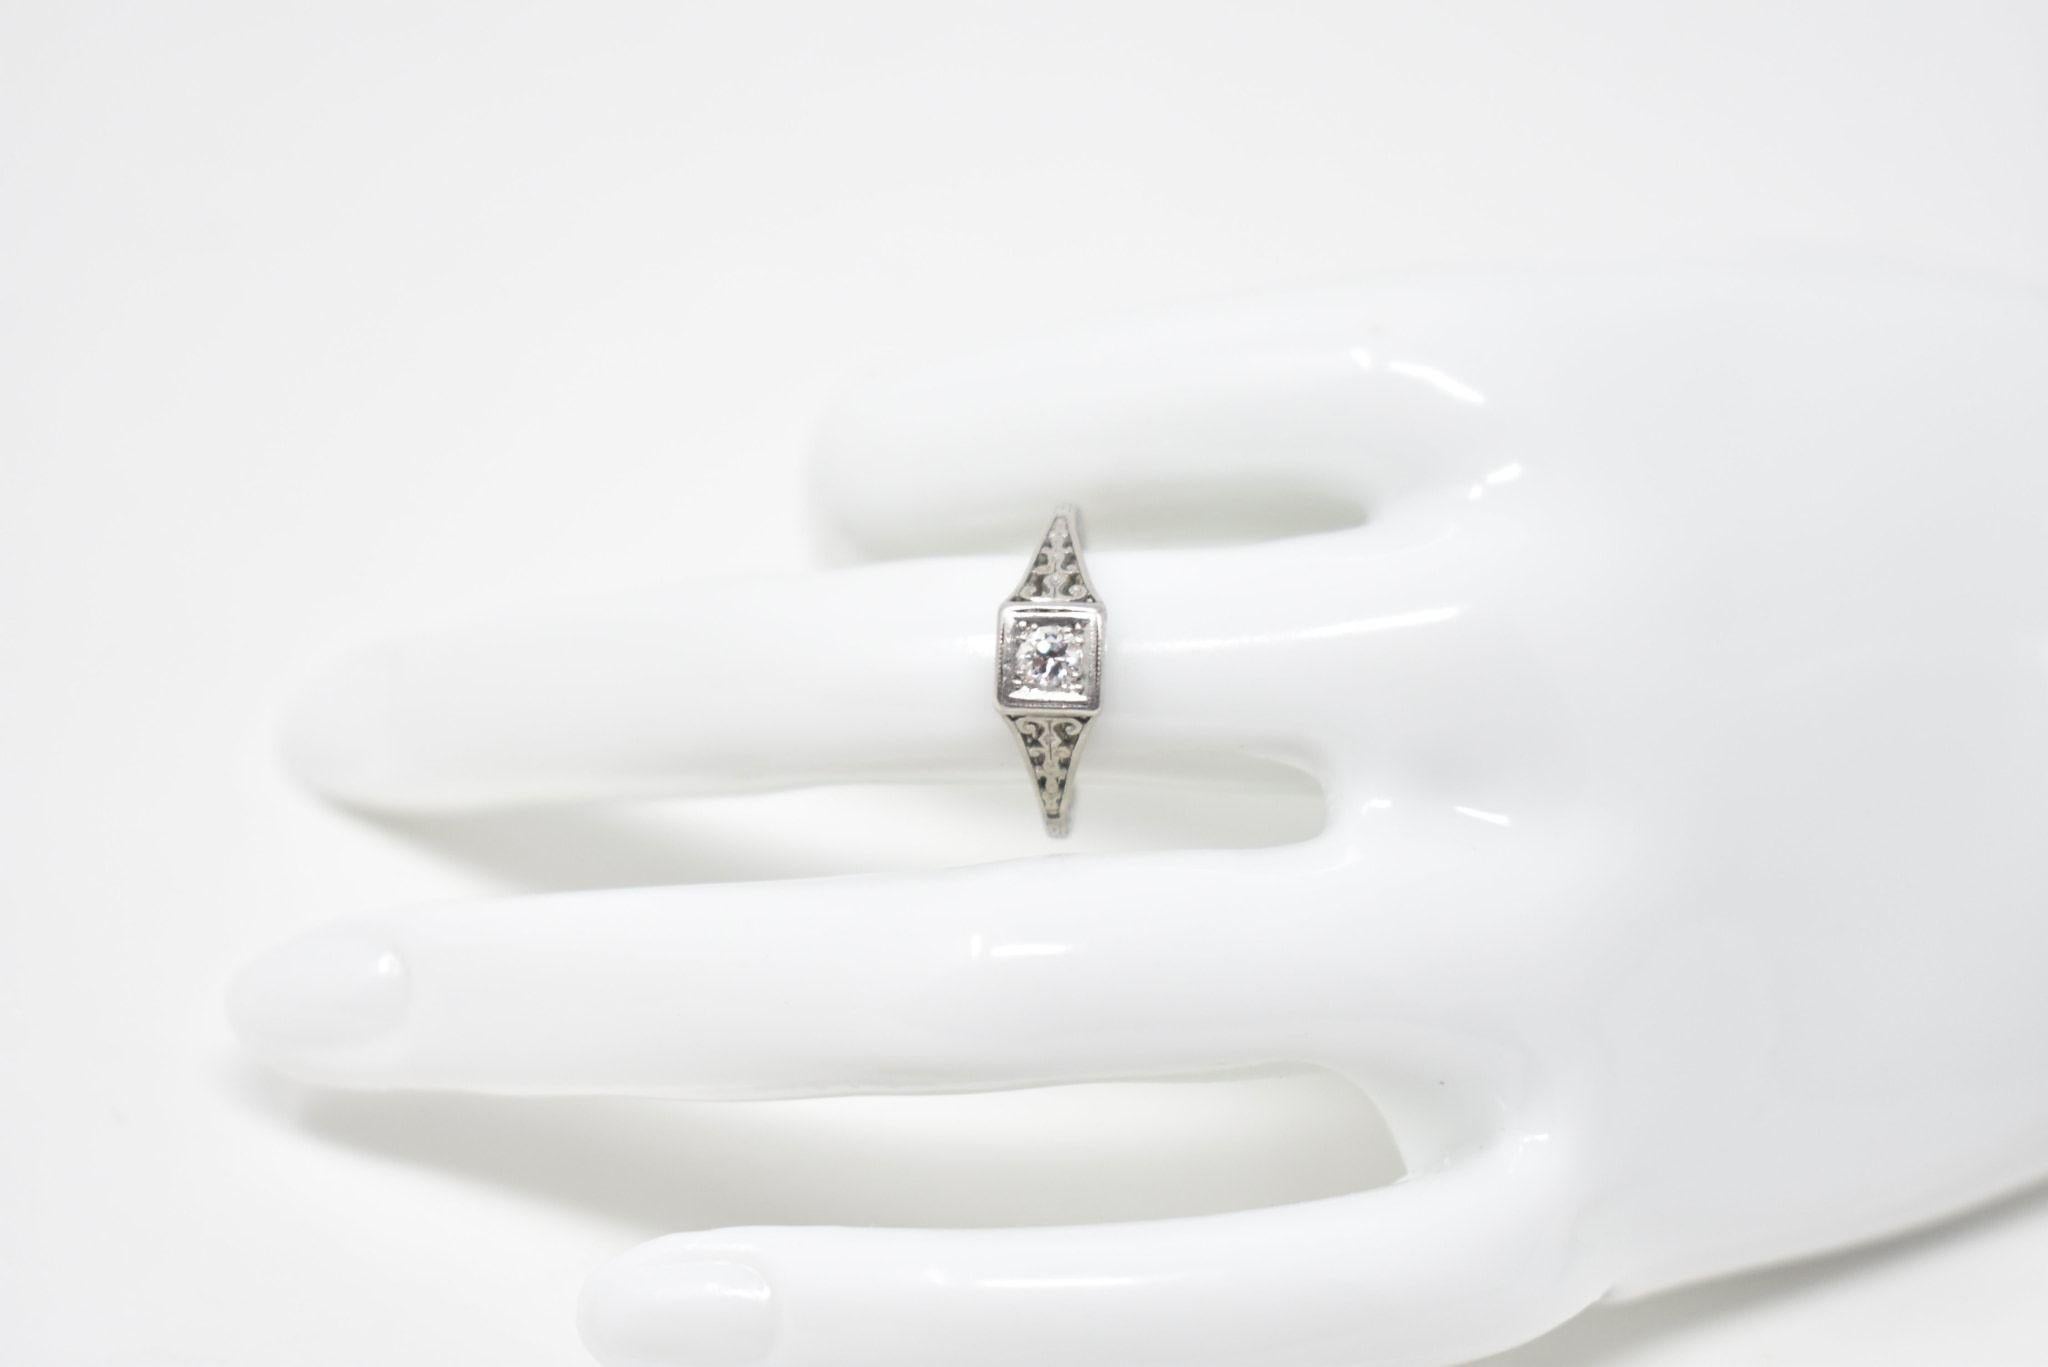 This is a lovely diamond engagement ring that has delicately scrolled filigree work on the shoulders. It is set in rich platinum and centering an old European cut diamond weighing approximately 0.15 carats, G color and VS clarity. The top of the